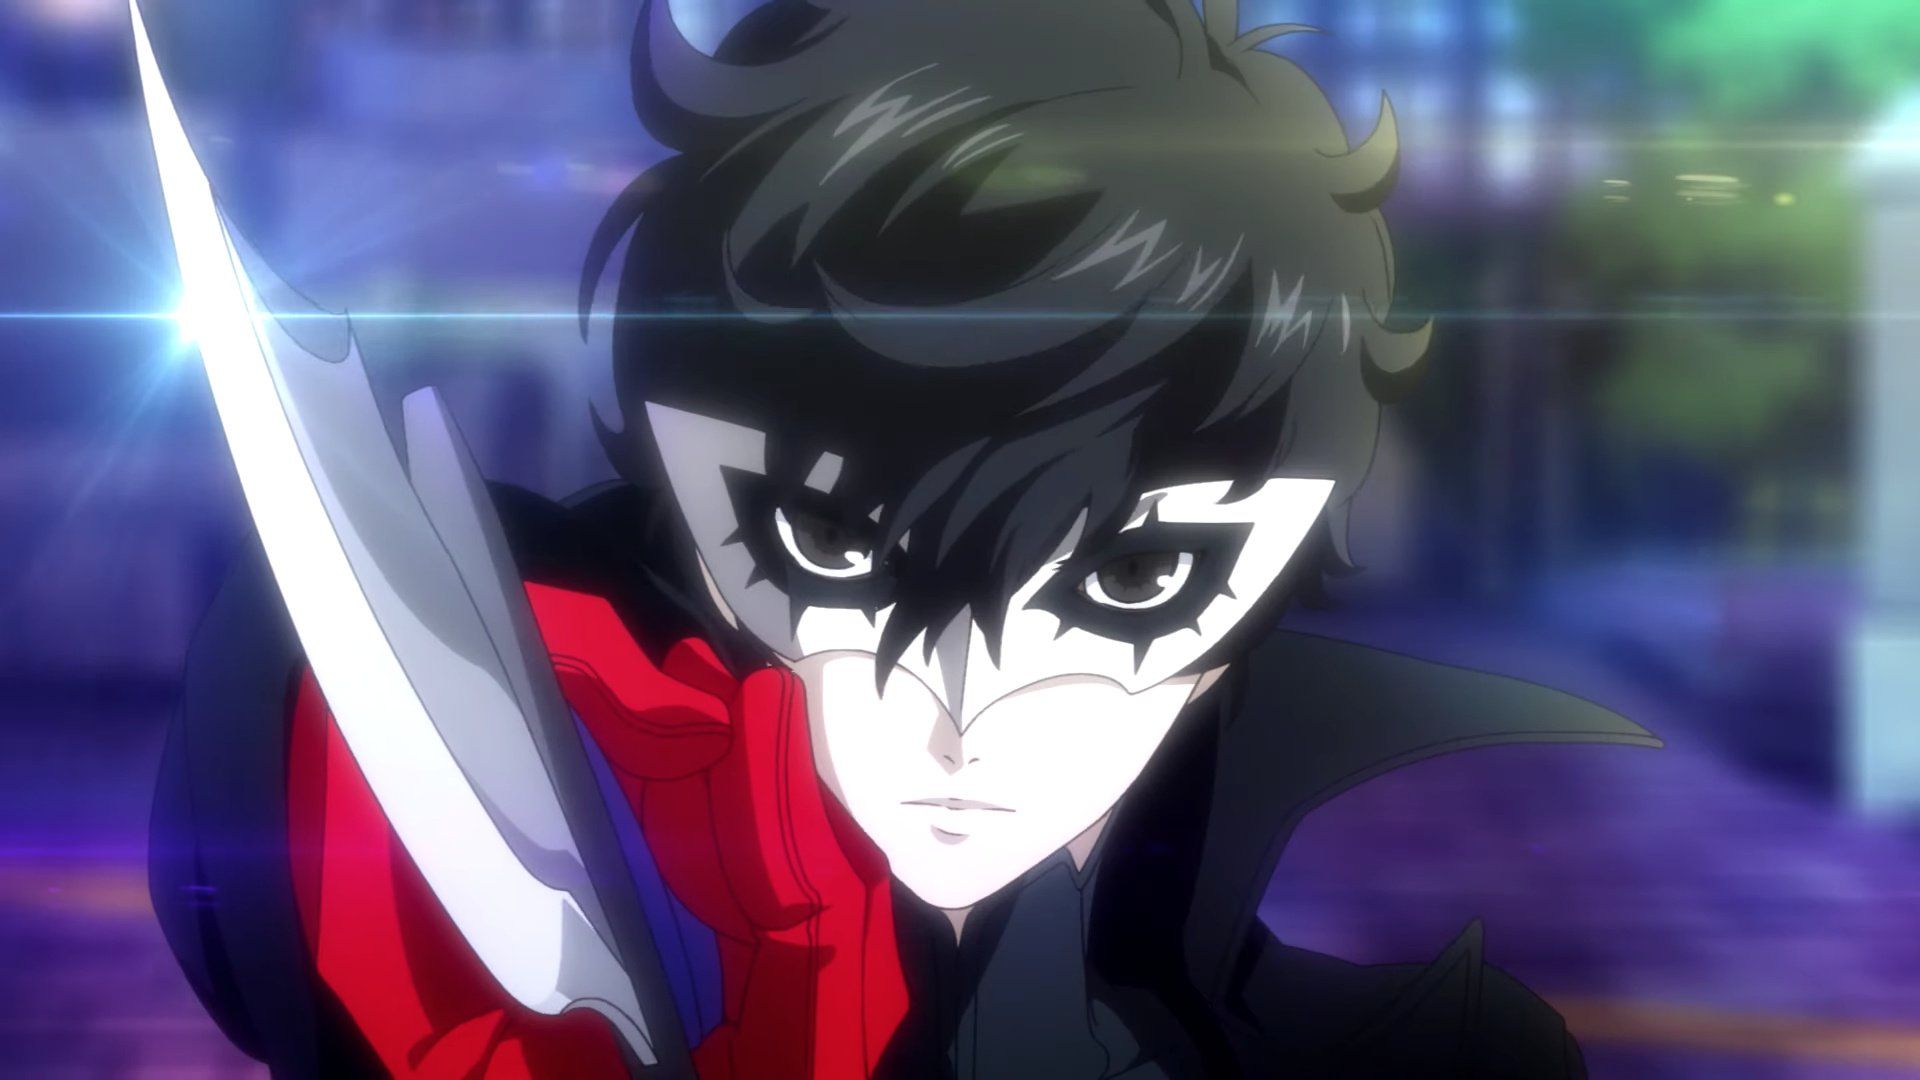 Persona 5 Scramble: The Phantom Strikers Officially Confirmed